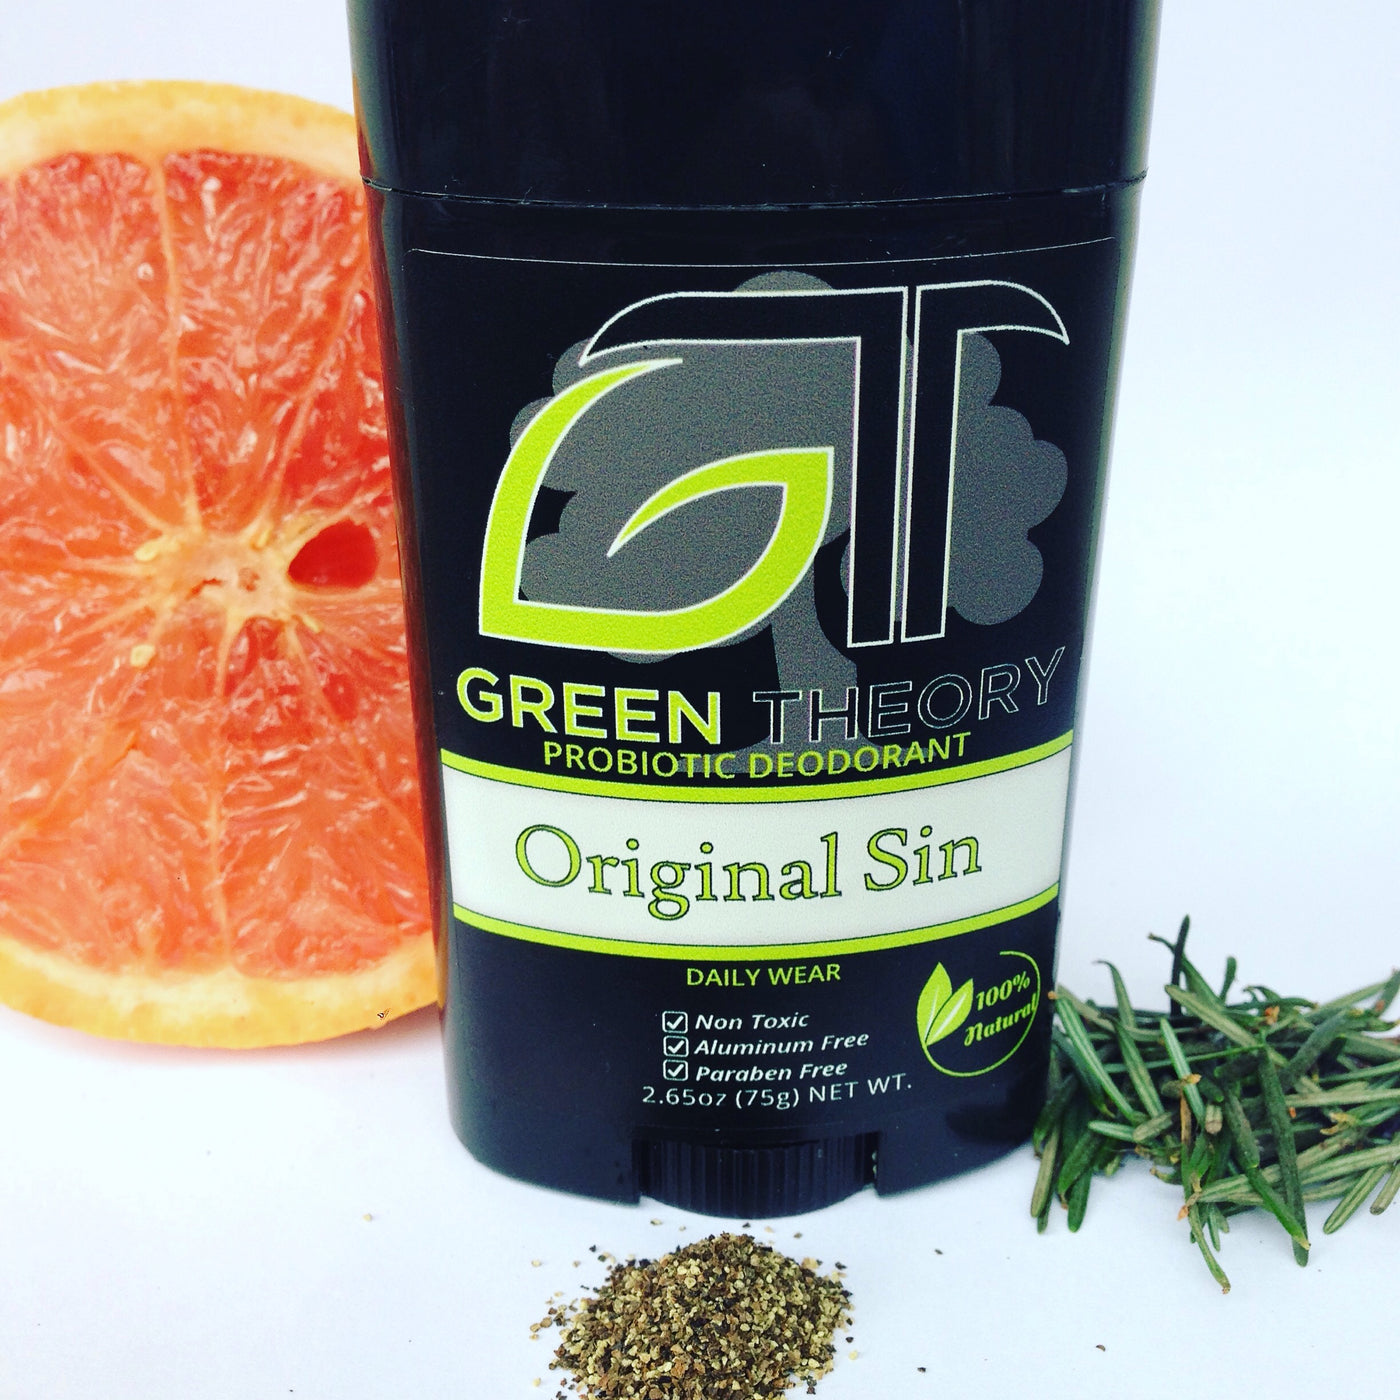 photo looking down at the front of a stick of green theory original sin probiotic natural deodorant for men. background is pure white and the stick is surrounded by a grapefruit slice, black pepper and fir needles to illustrate the scent